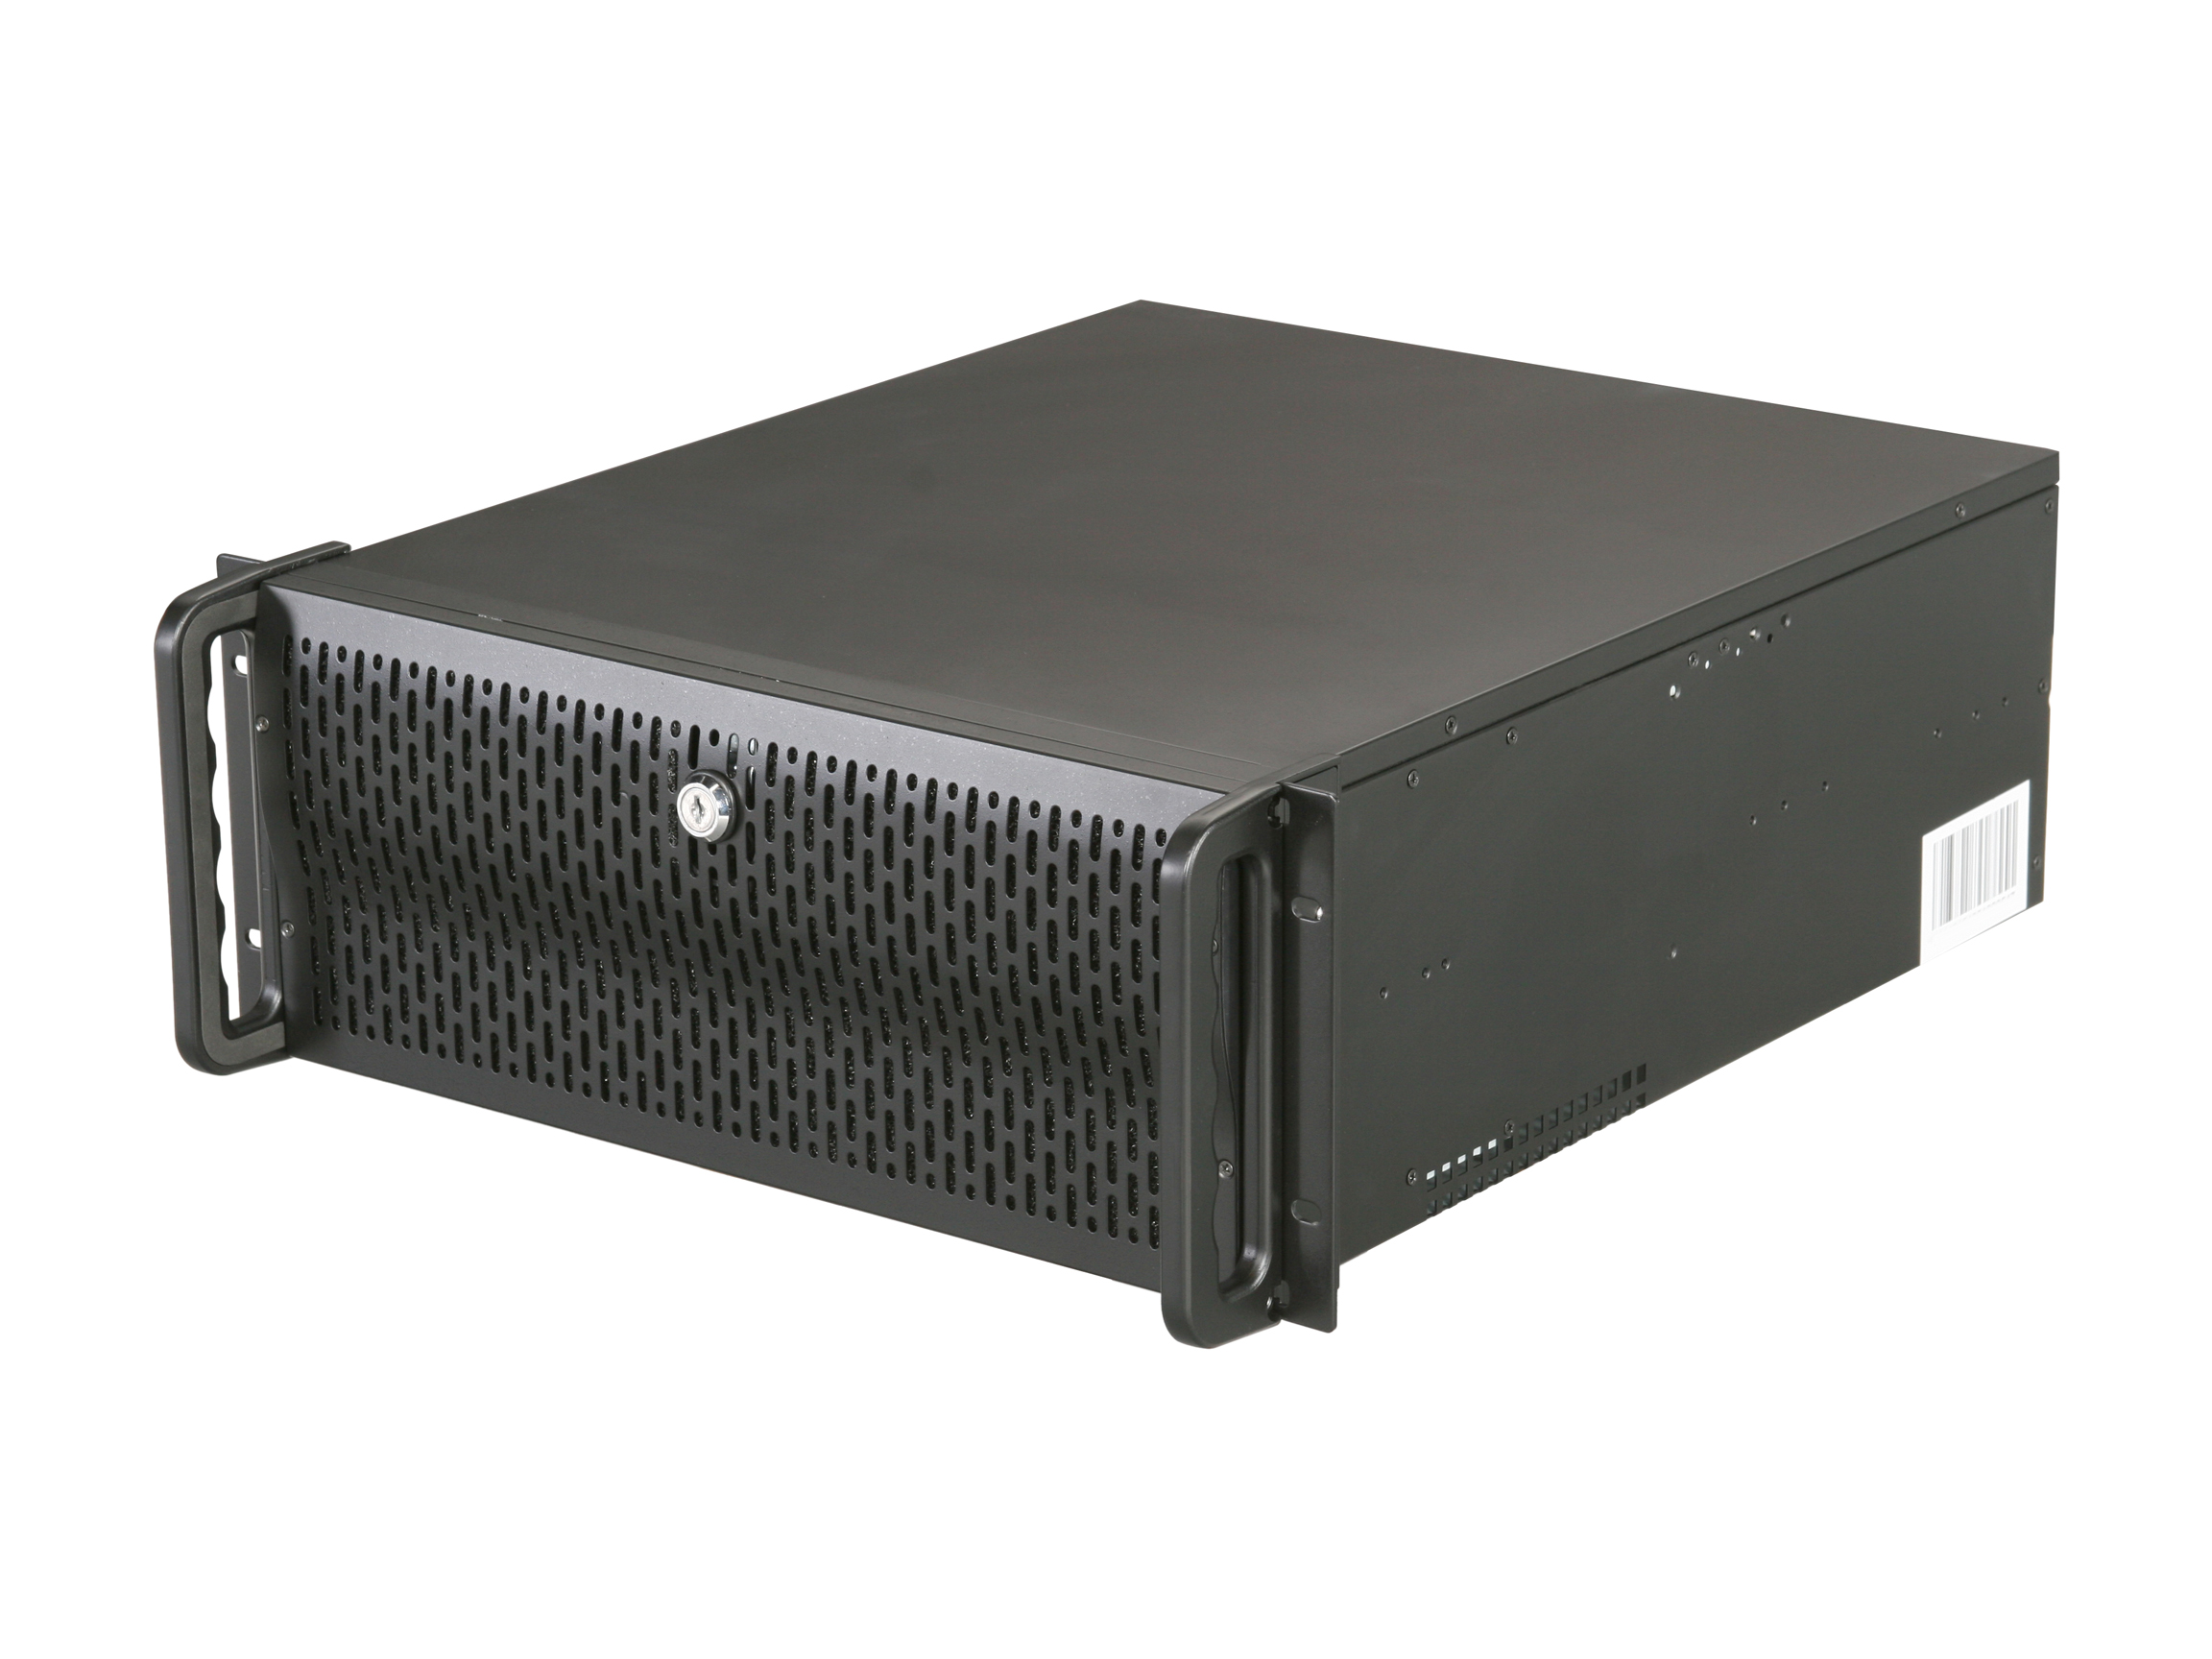 Rosewill RSV R4000 Black 1.0mm SECC, 4U Rackmount Server Chassis 8 Internal Bays, 4 Included Cooling Fans